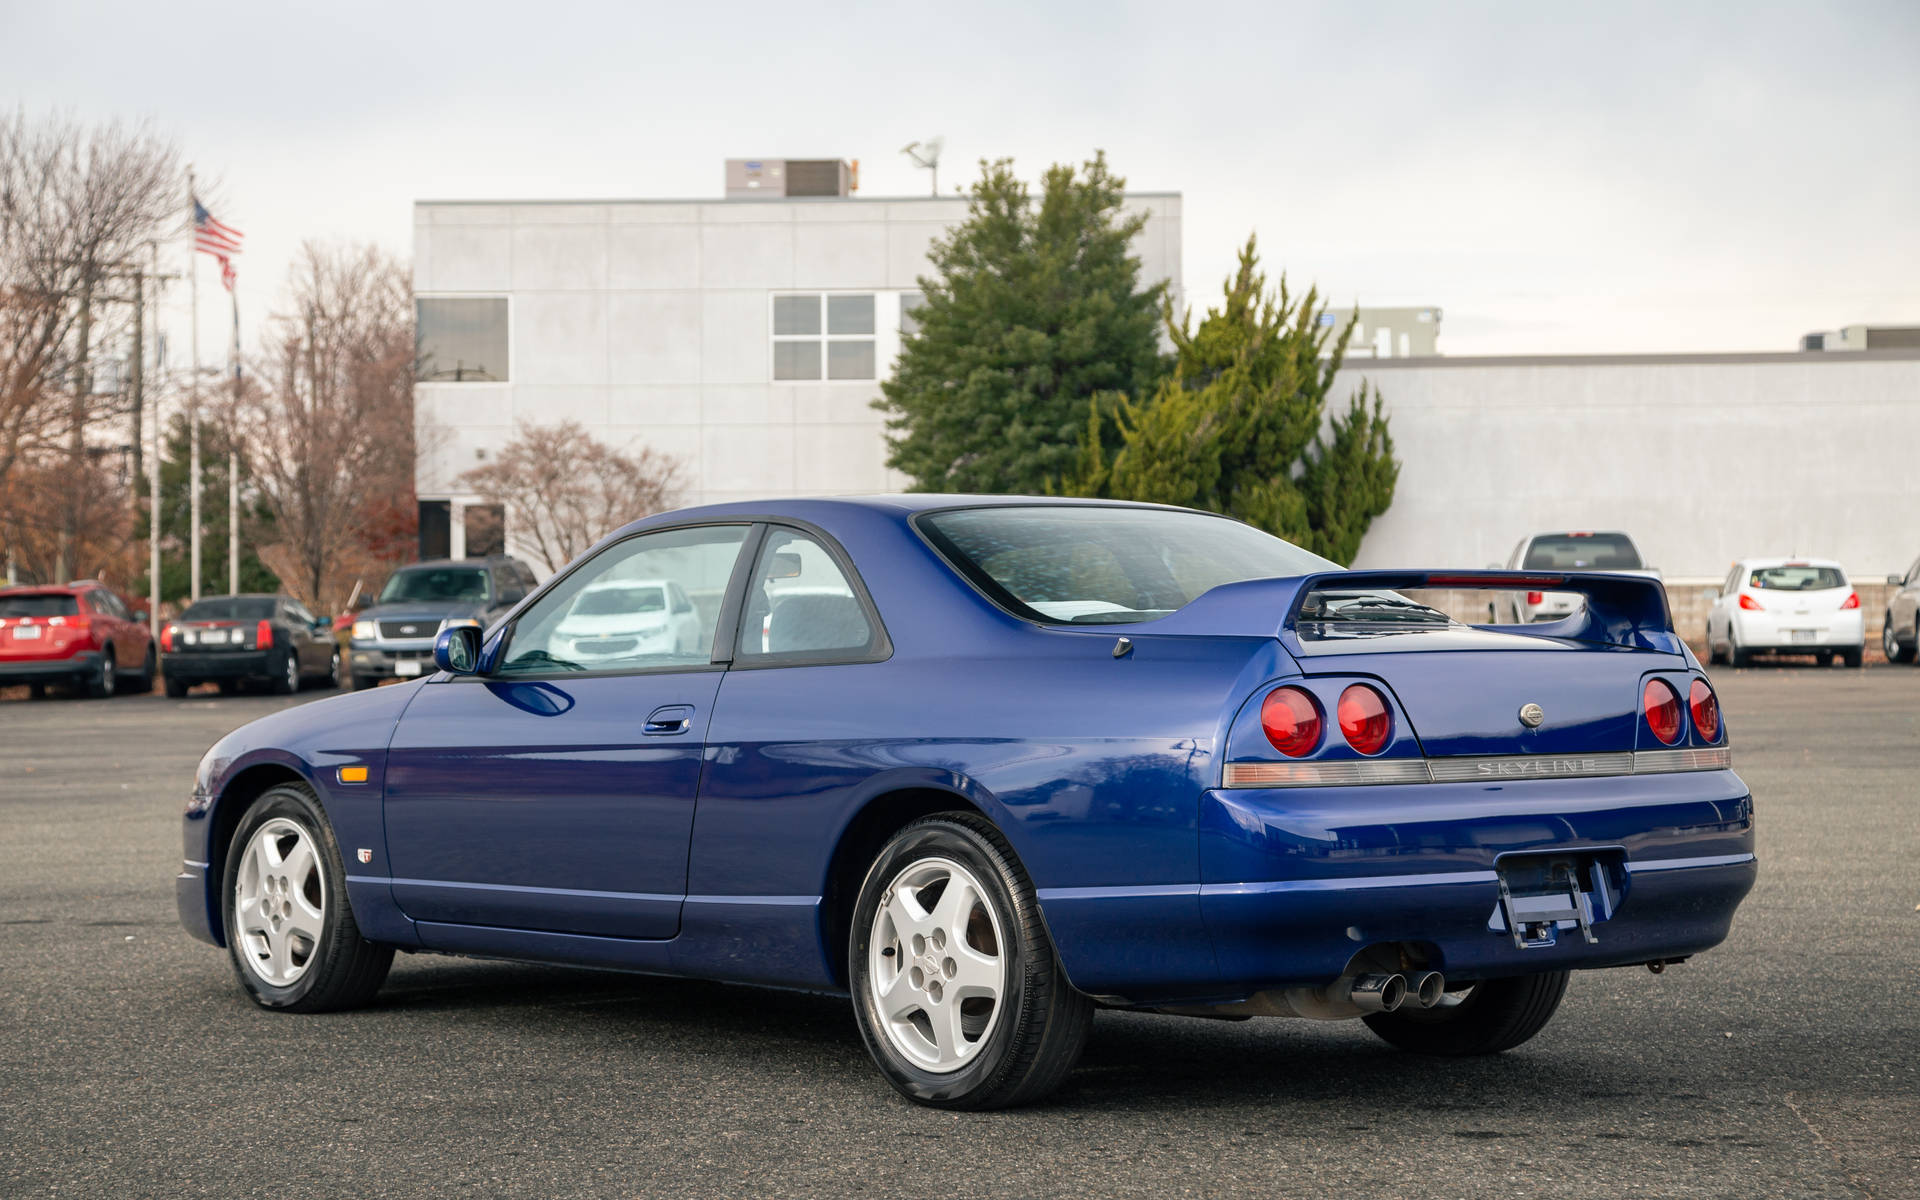 Blue Skyline Car Without License Plate Wallpaper